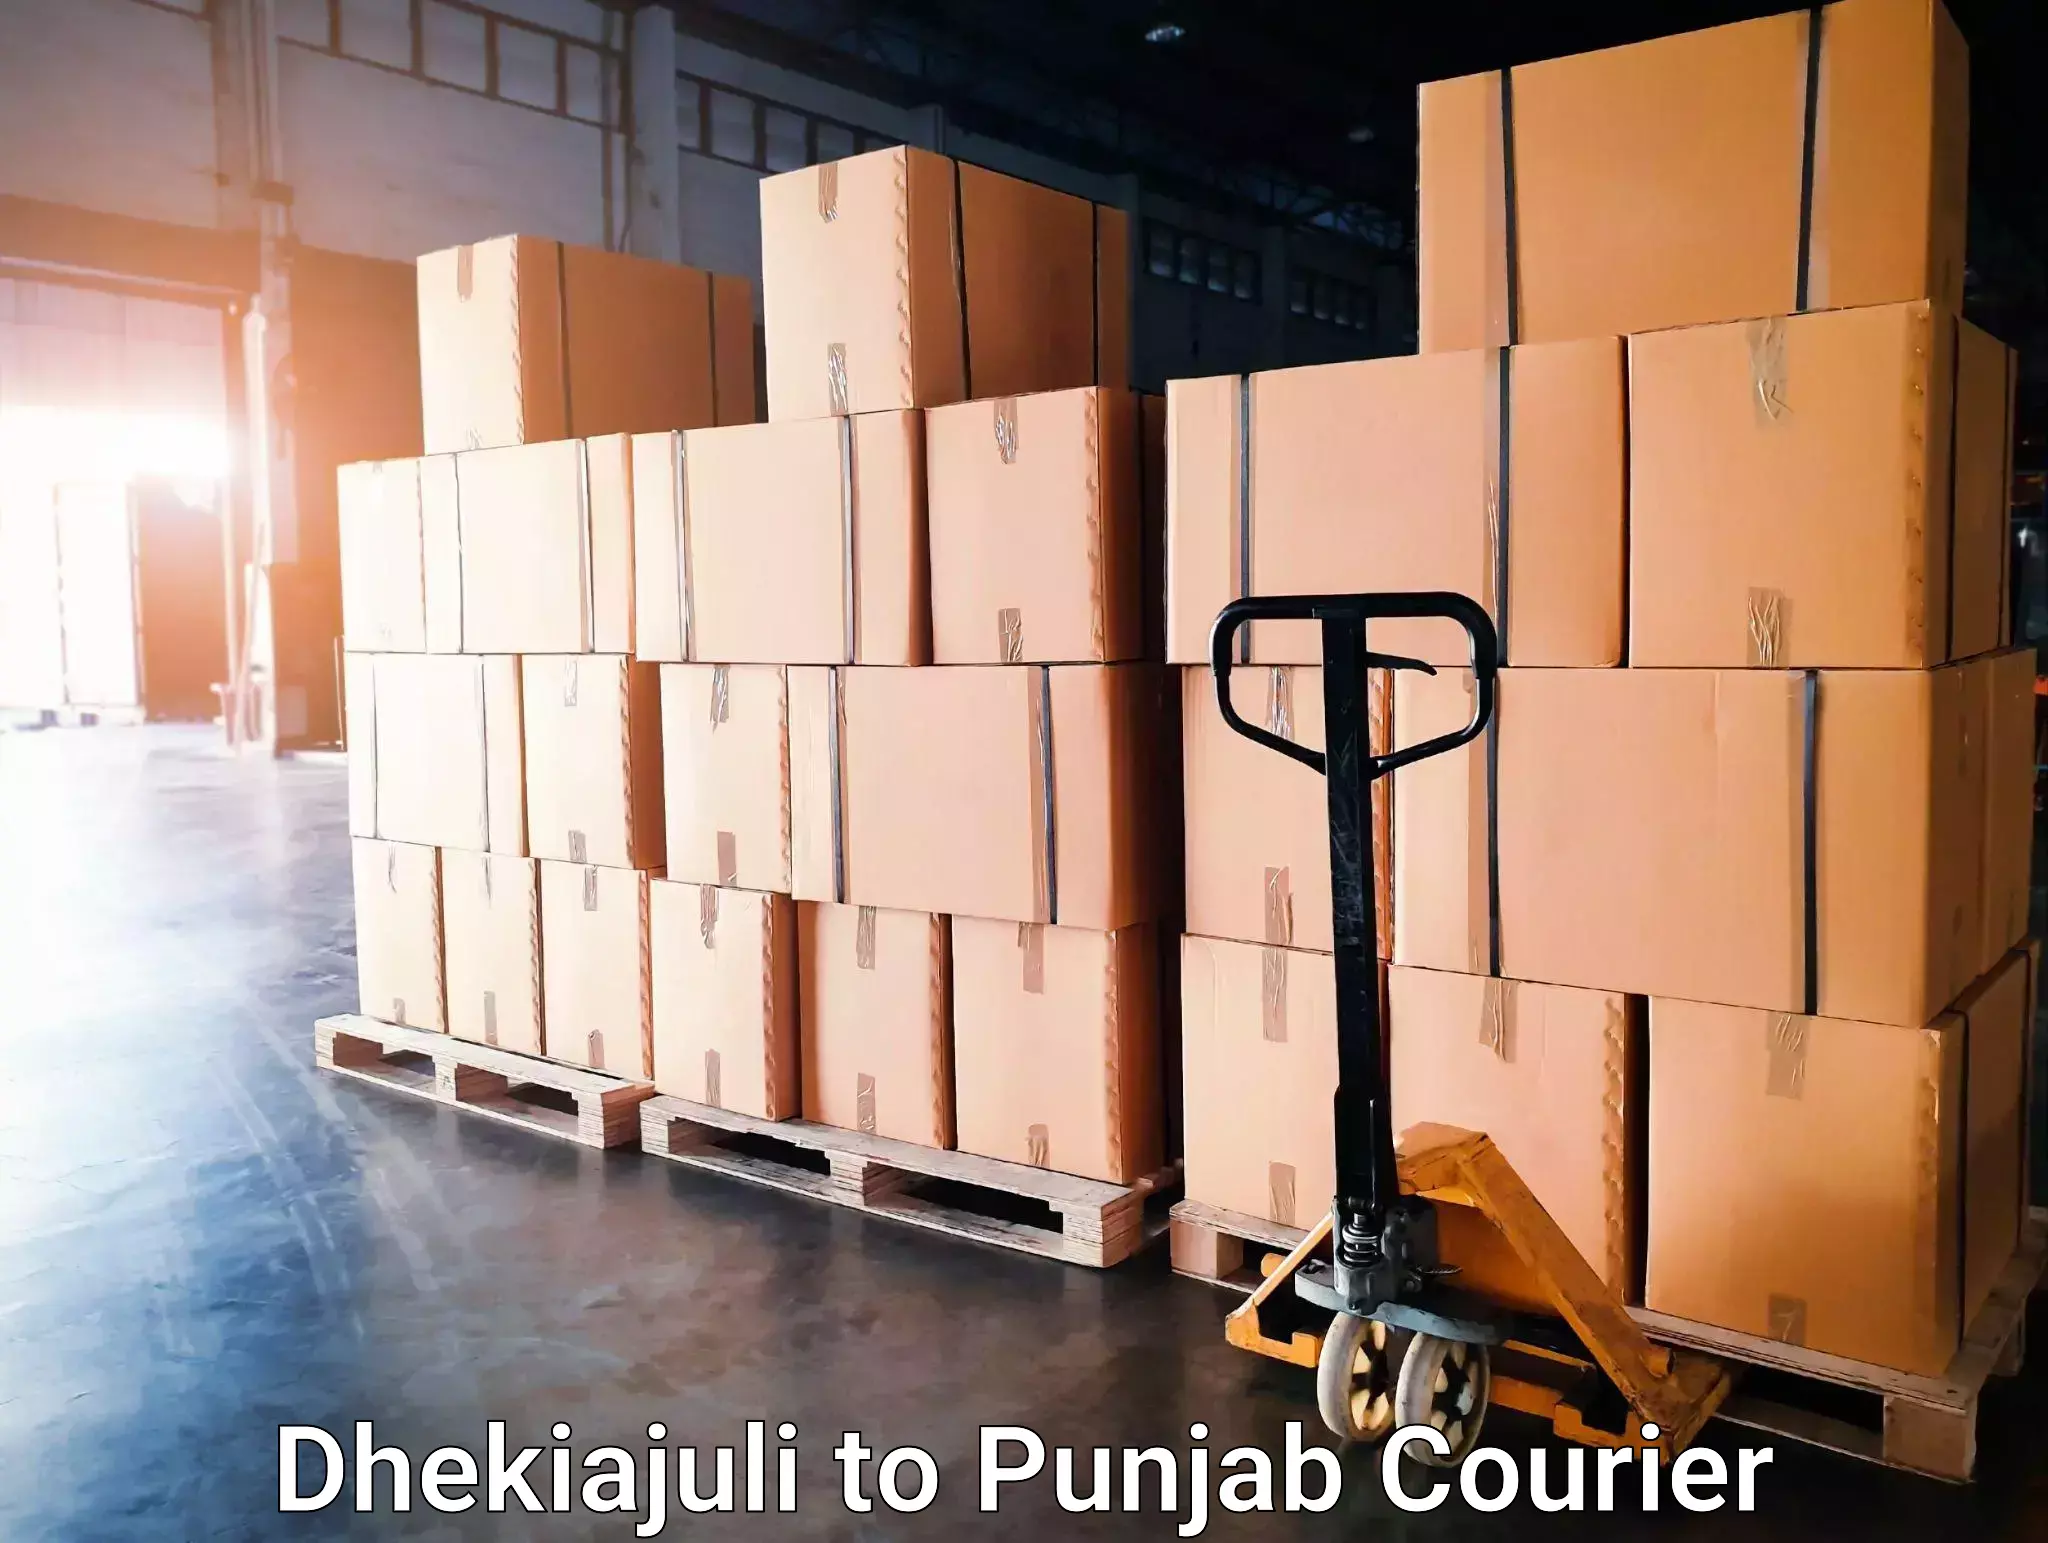 Overnight delivery services Dhekiajuli to Abohar